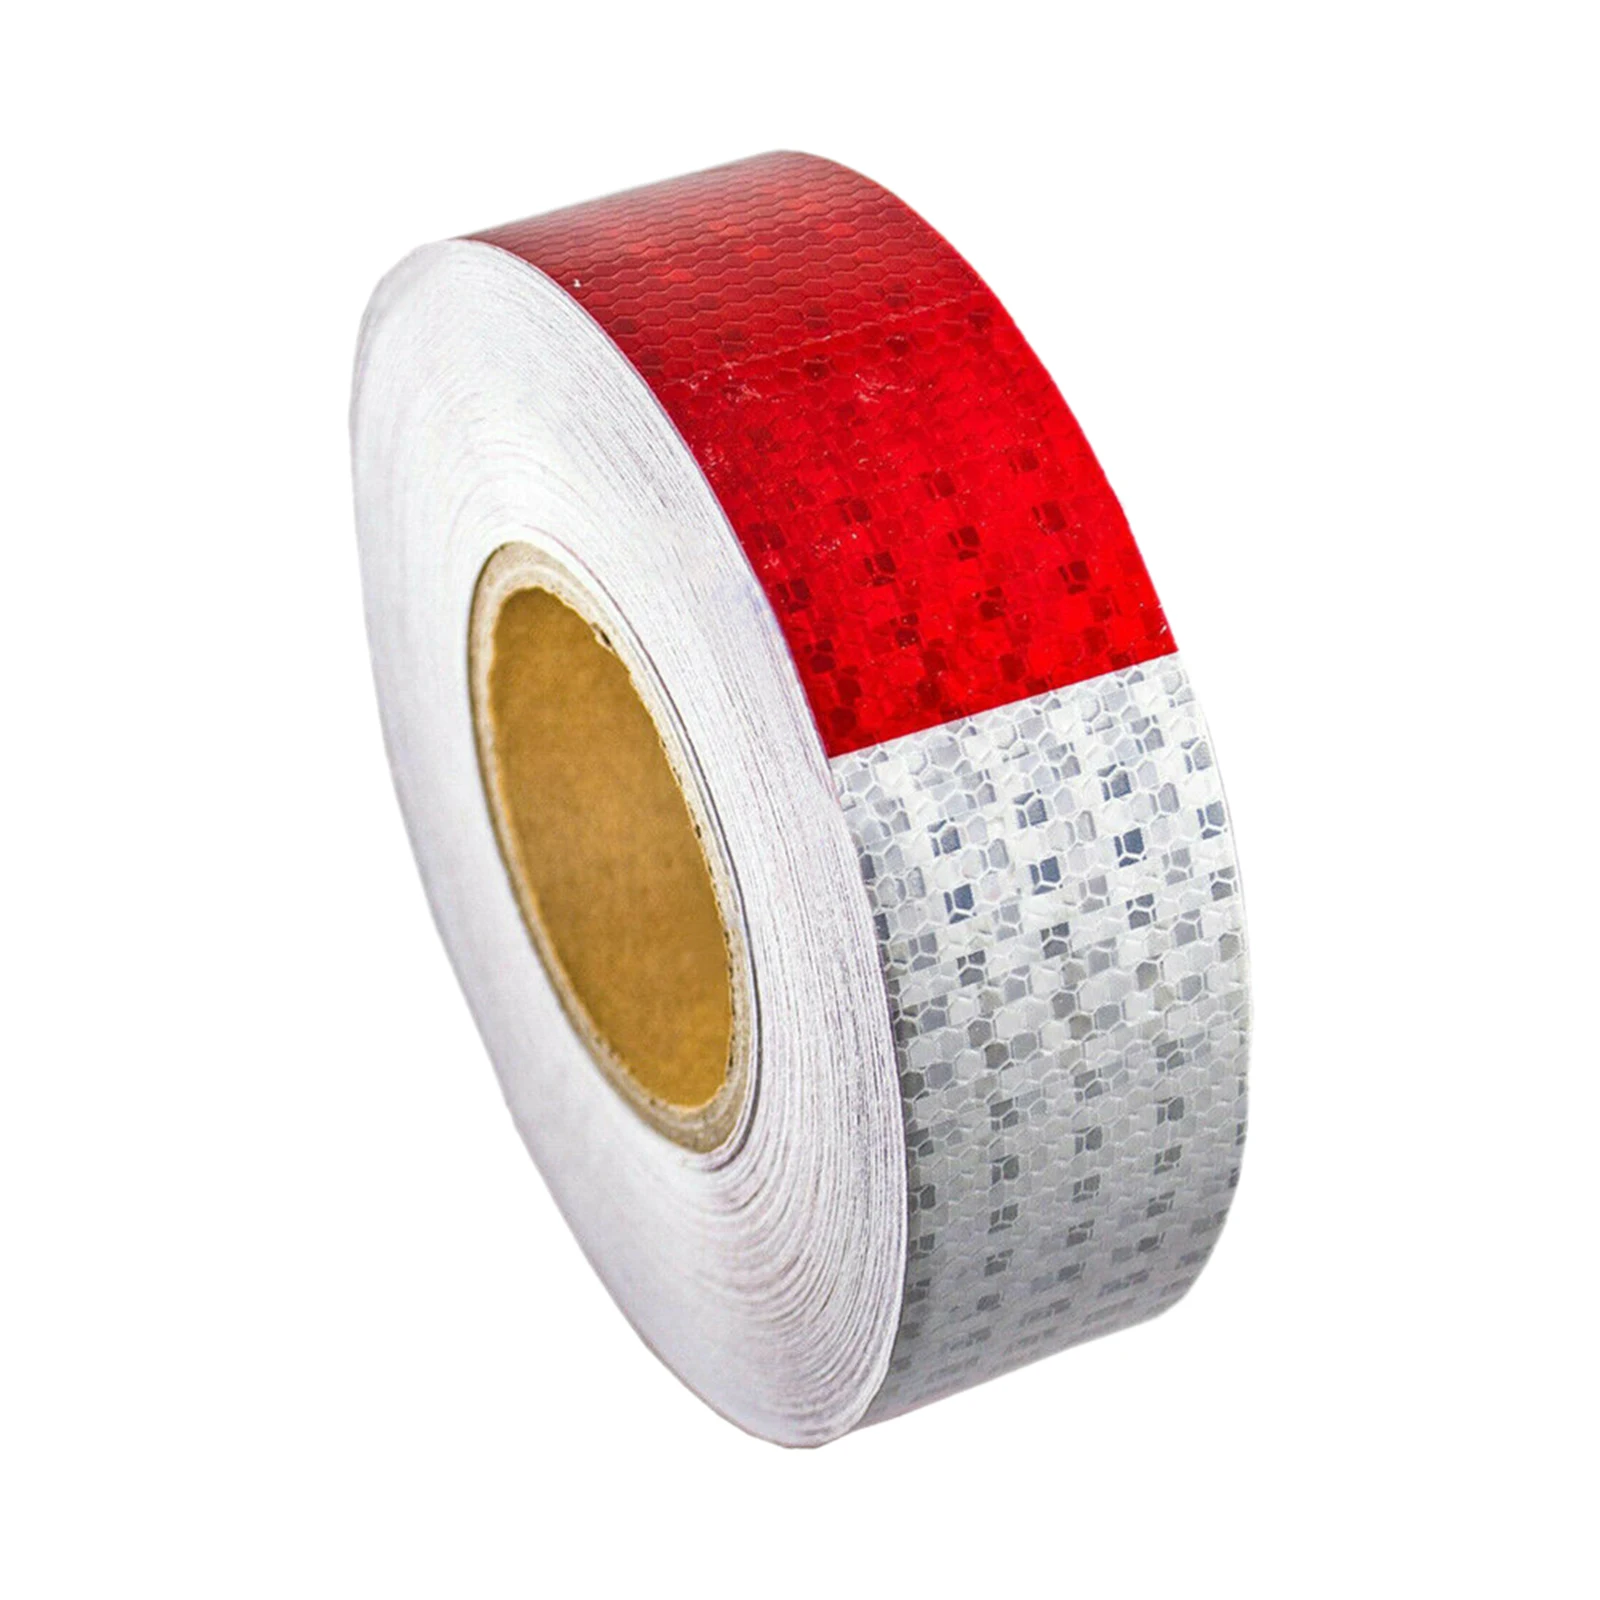 CONSPICUITY TAPE 2"X150 FT SILVER HIGH INTENSITY REFLECTIVE SAFETY TRUCK TRAILER 